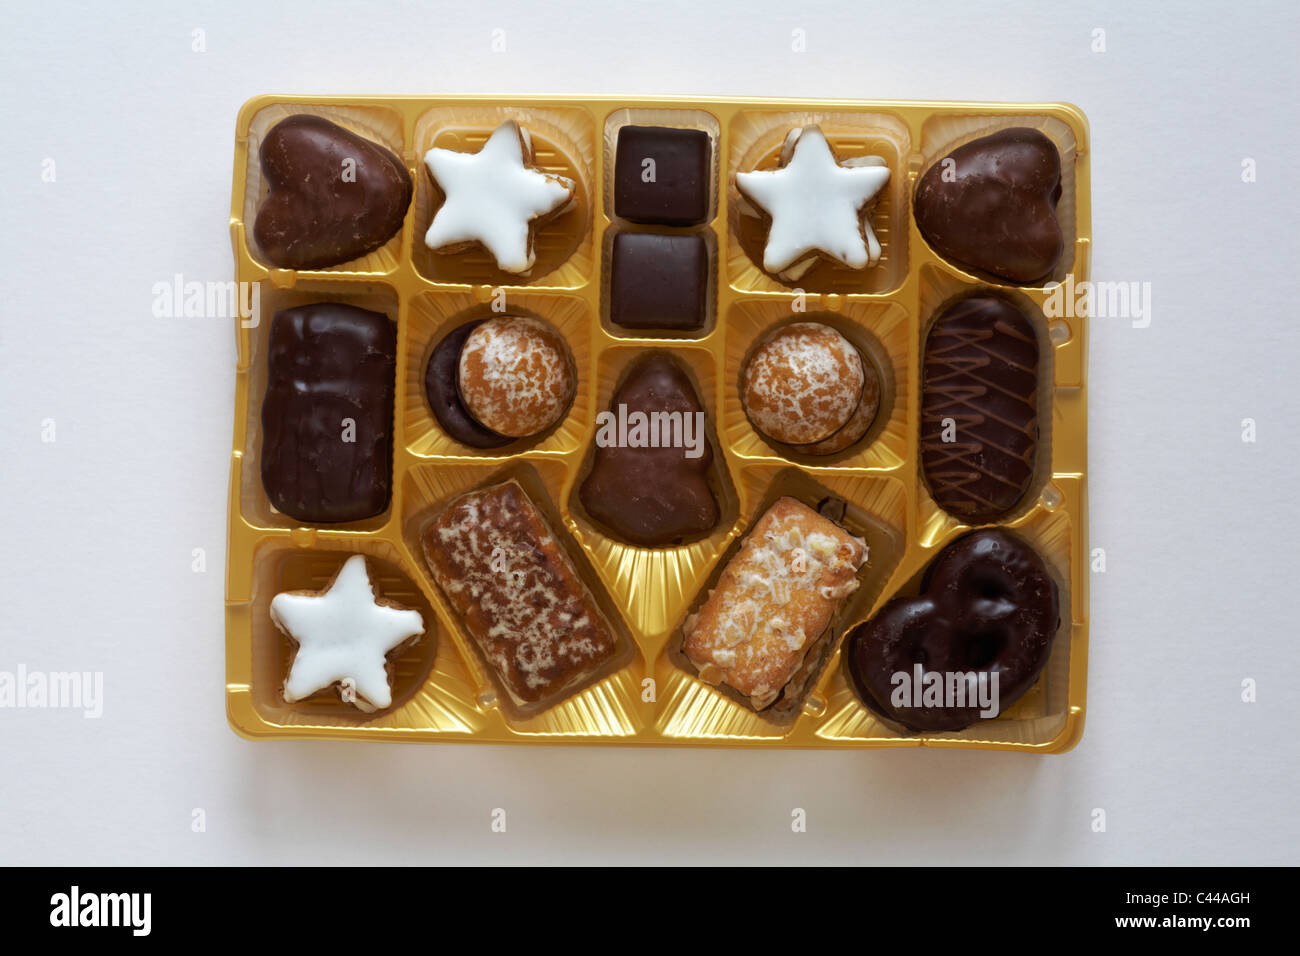 Box of Marks & Spencer Lebkuchen selection biscuits opened to show contents isolated on white background Stock Photo